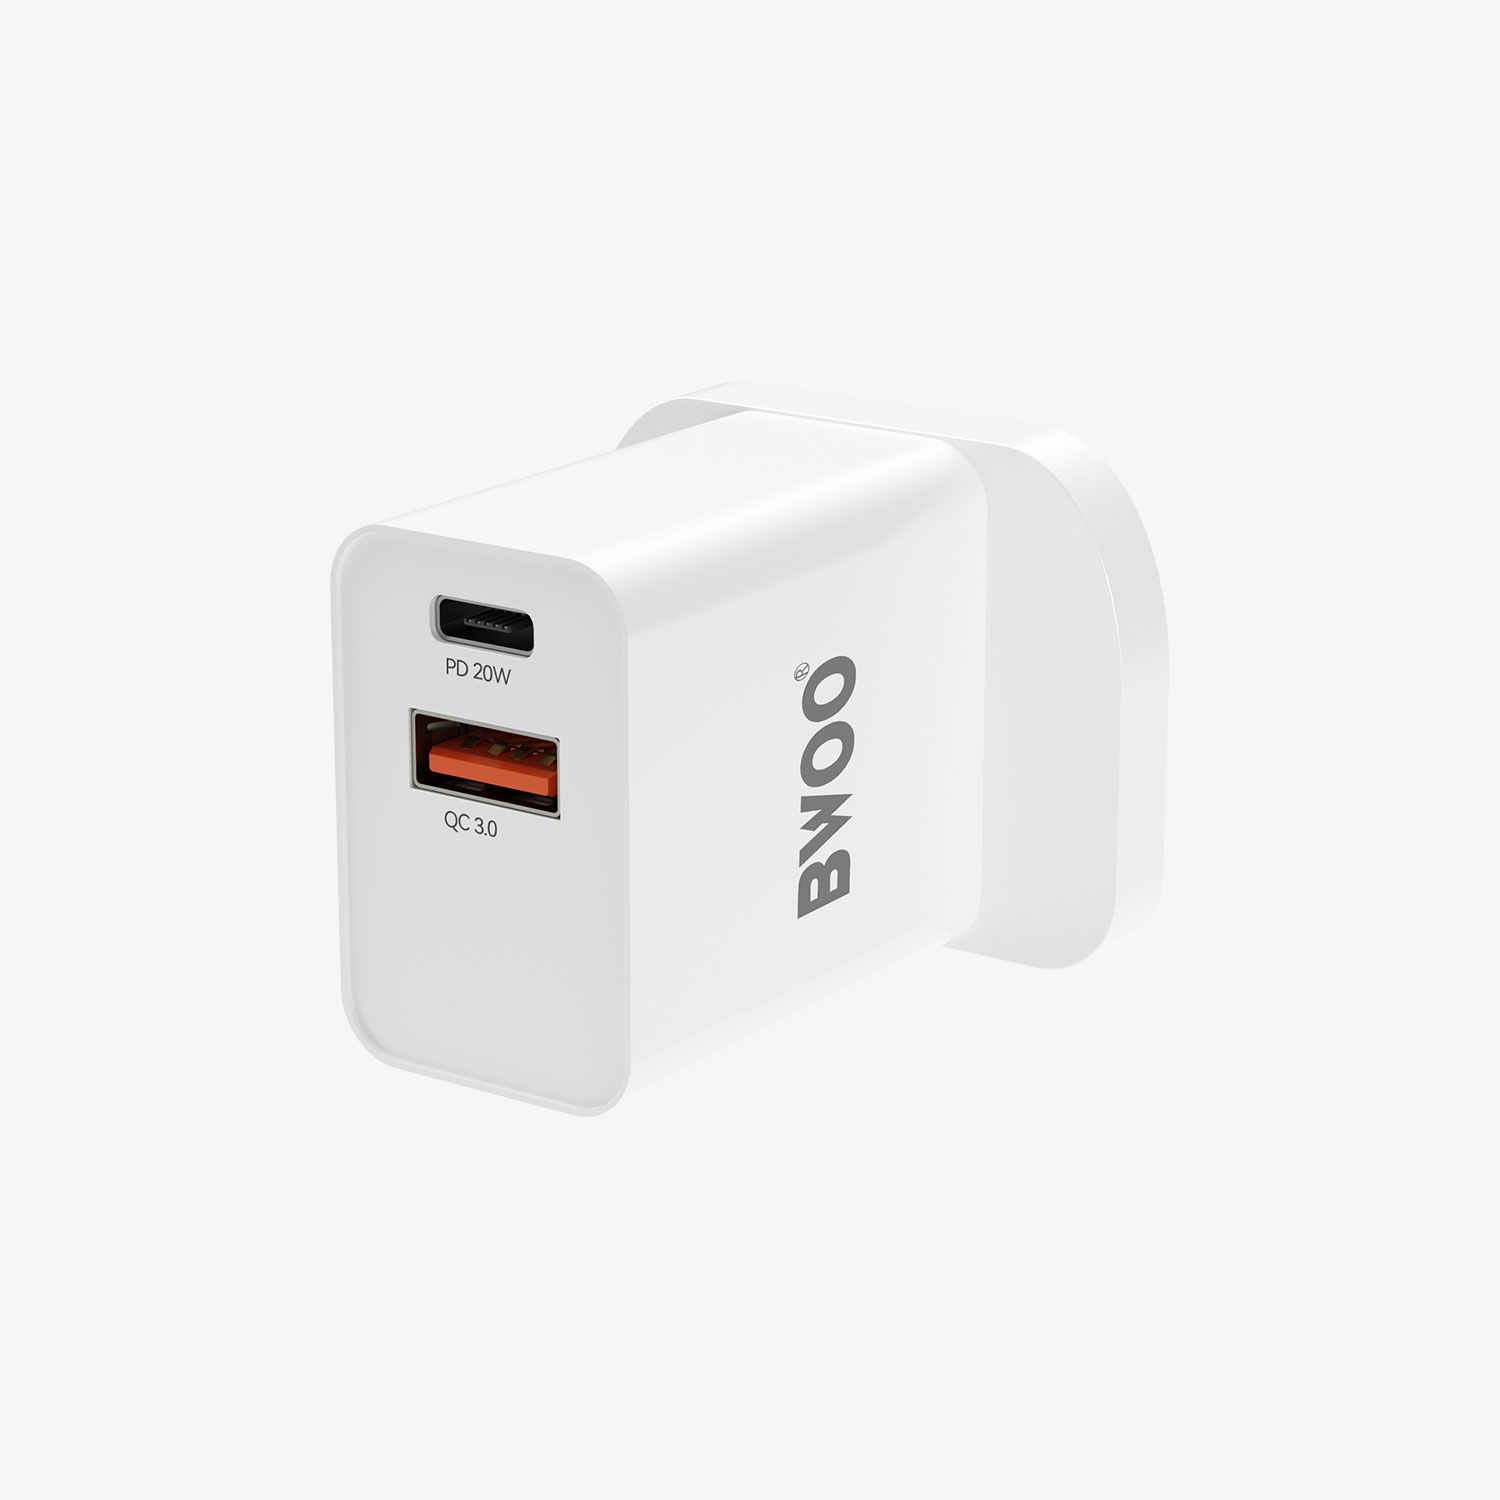 PD 20W mobile phone charger